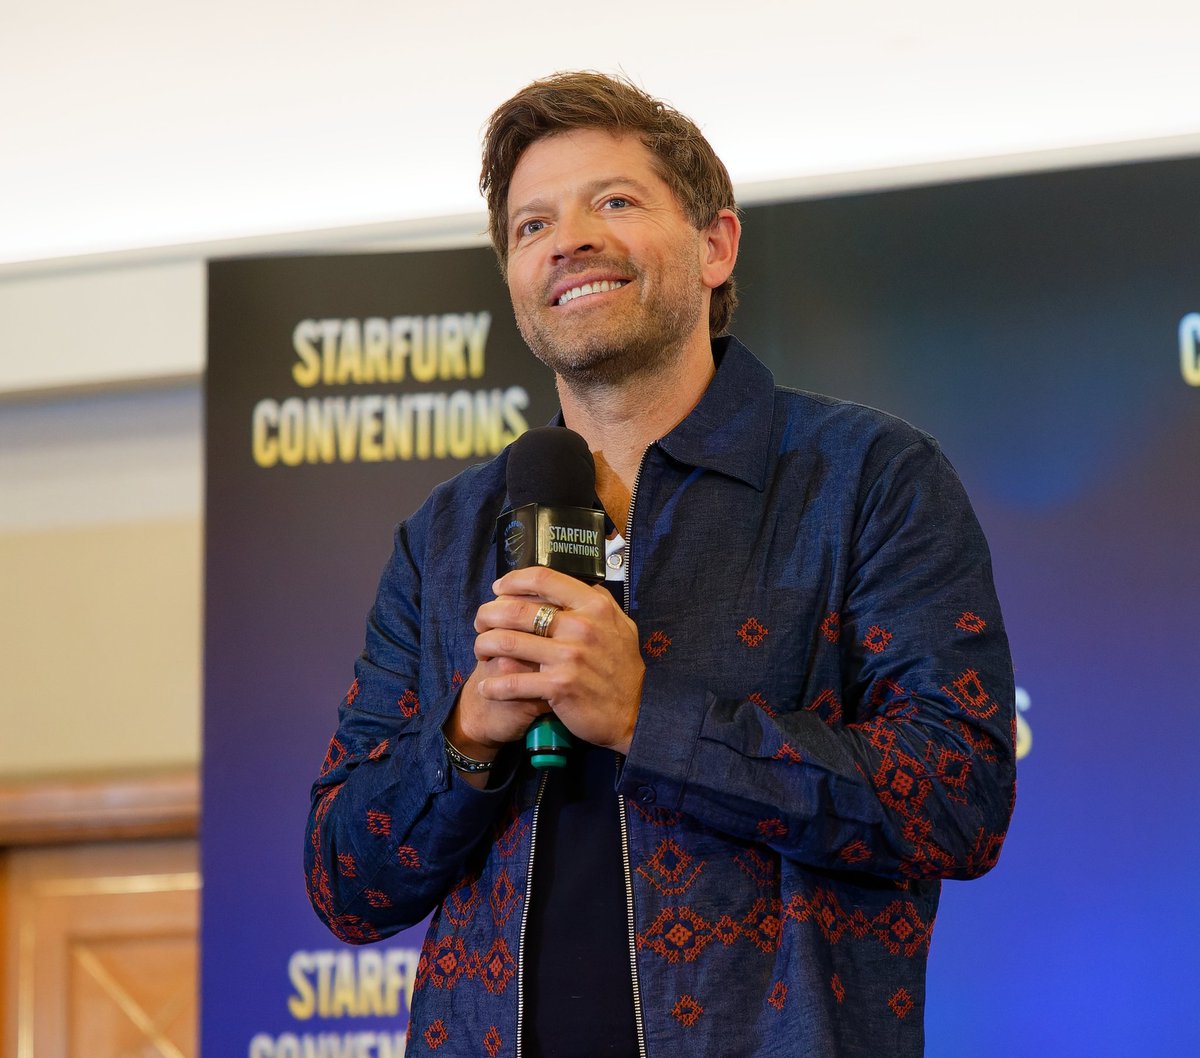 At Starfury: Cross Roads 8 last weekend, @mishacollins onstage for his guest talk.